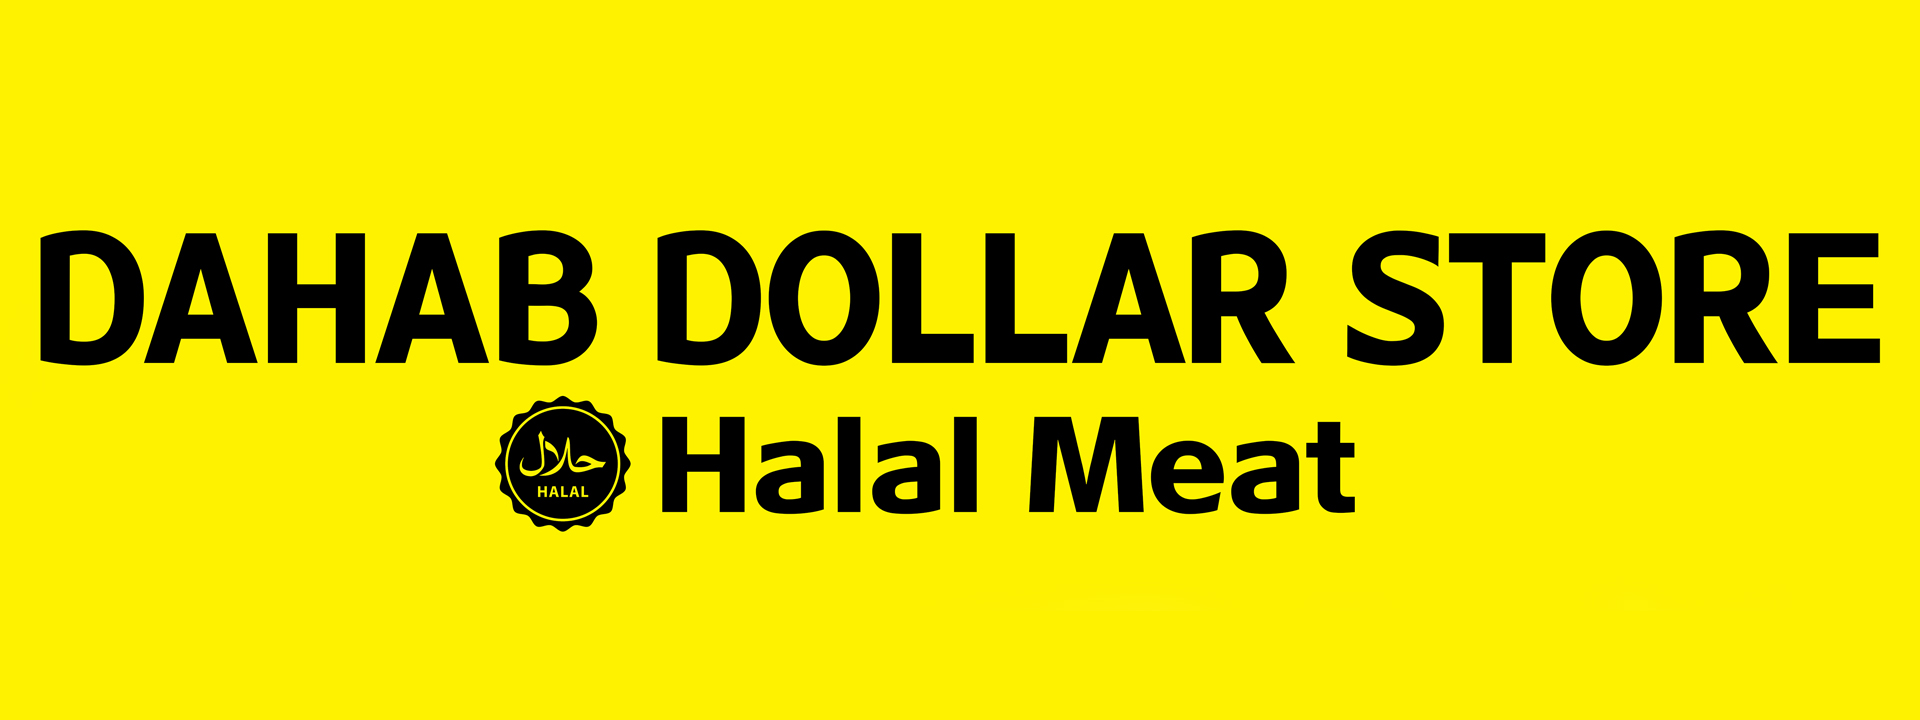 Dahab Dollar Store and Halal Meat